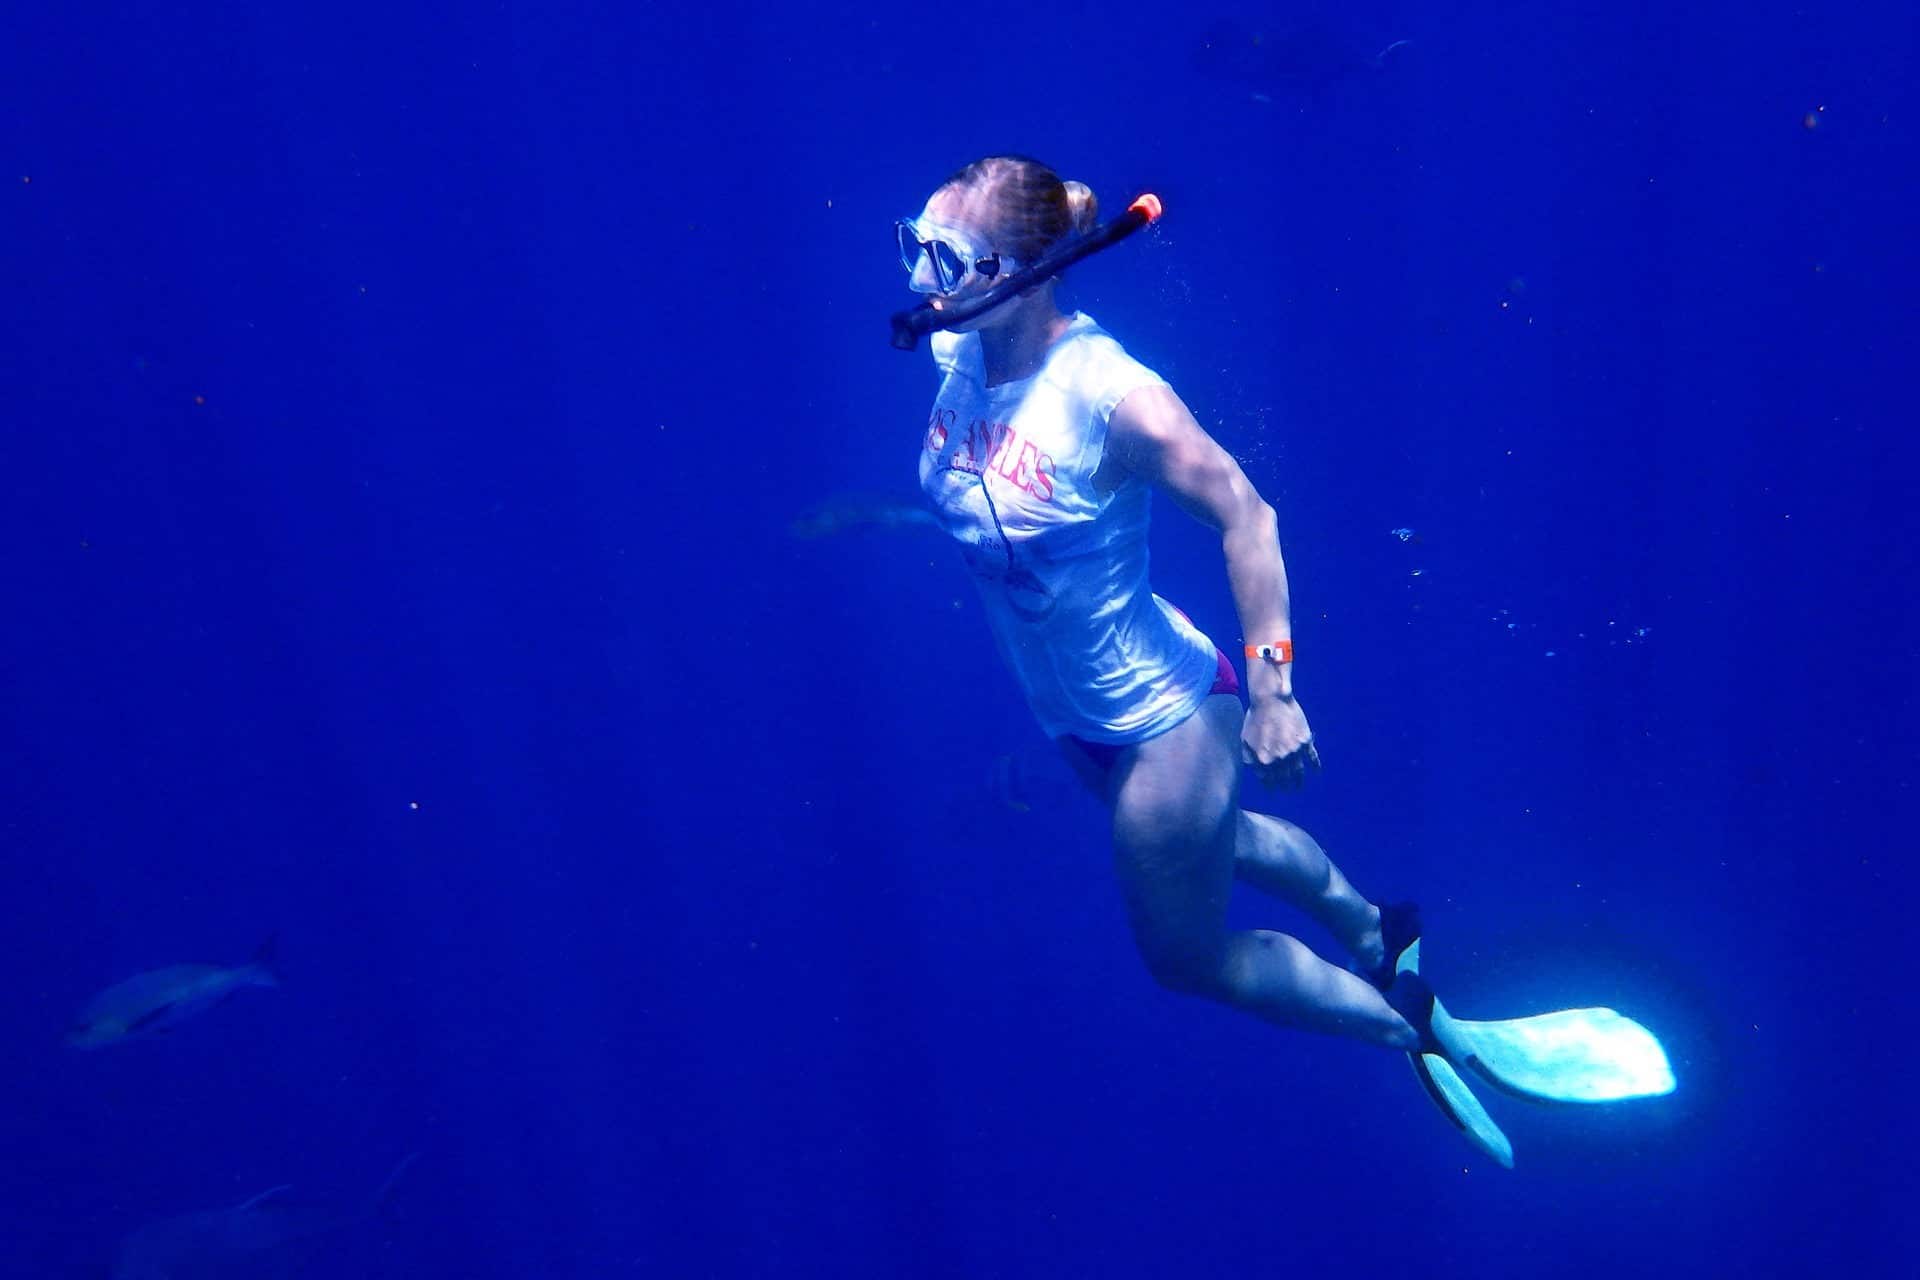 freedive spearfishing risks shallow water blackout